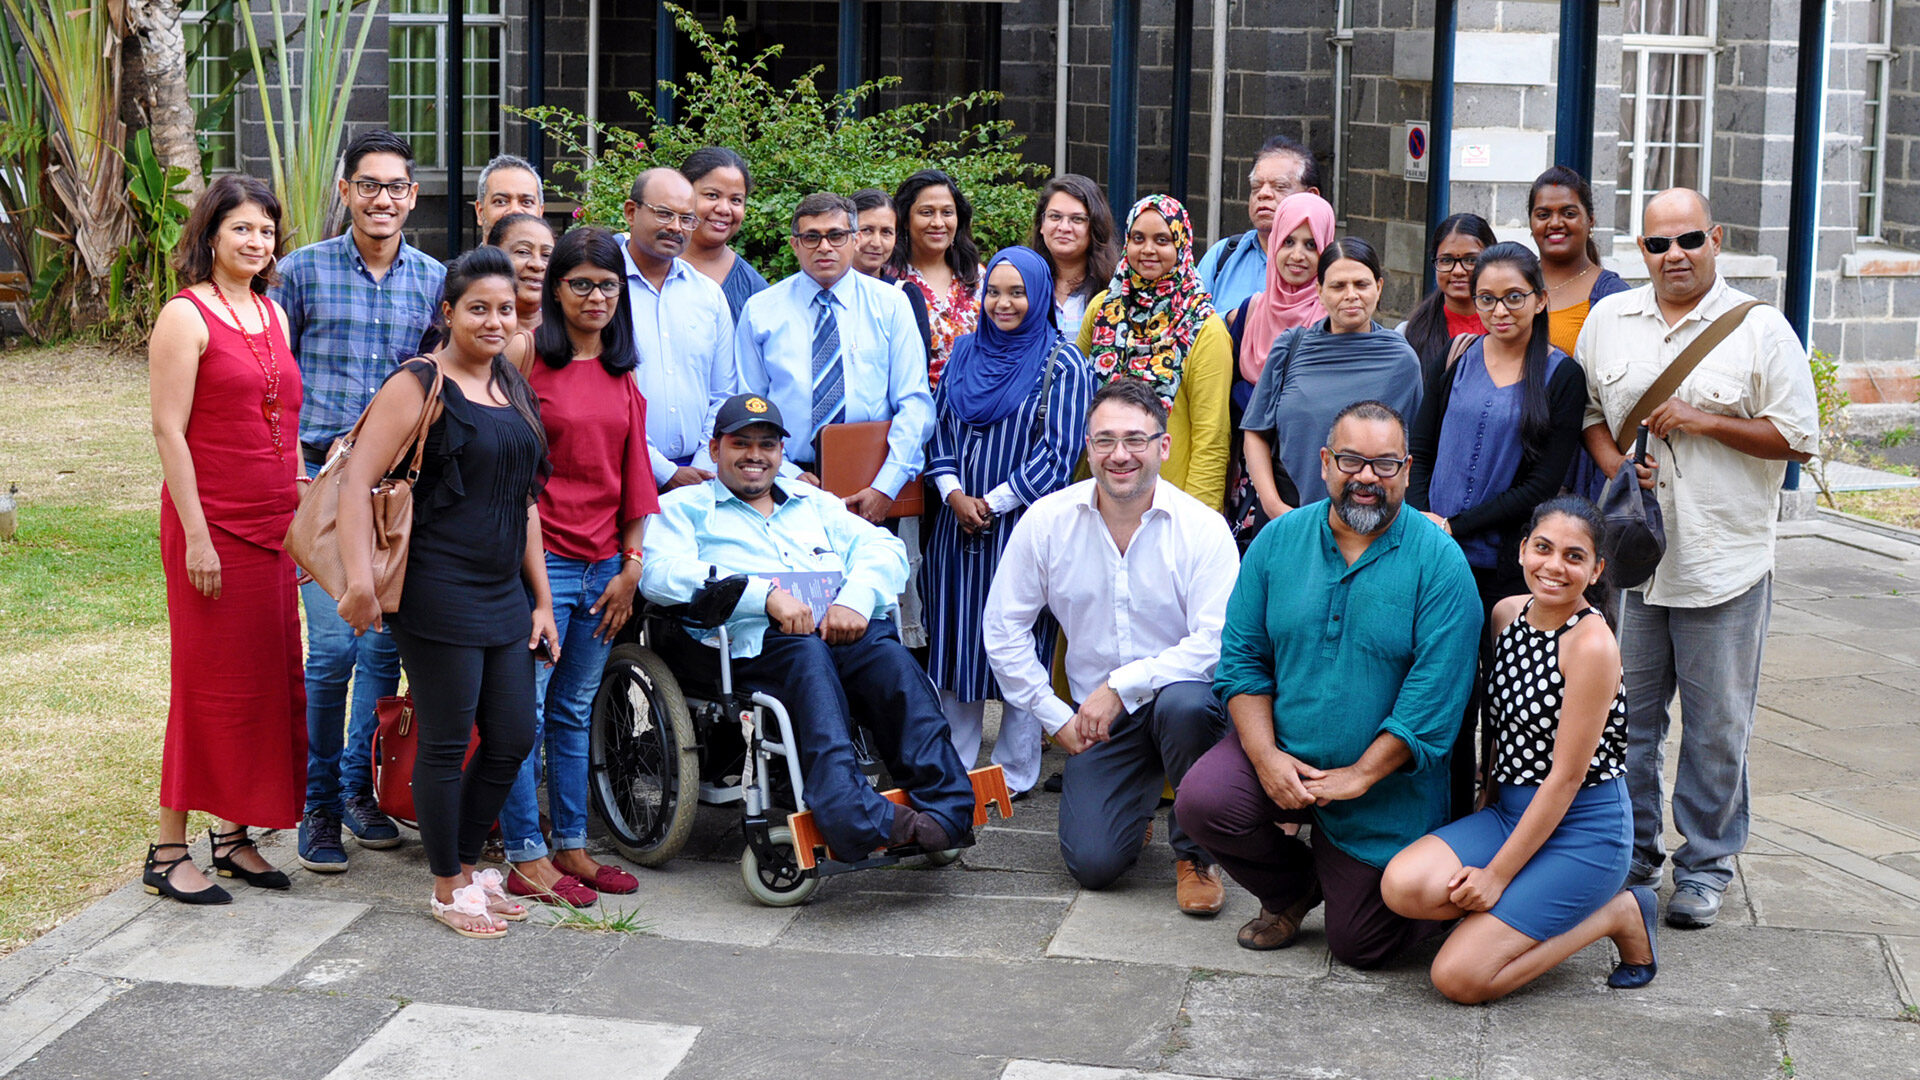 A group of people standing, sitting in wheelchairs or kneeling while smiling at the camera. They are a mixture of different races, skin colours, genders, ages and disabilities. They are in a bright, outdoor setting in front of a modern bricked building.Amongst them is Atif, CEO of Diversity and Ability, a brown man with short dark hair and glasses. 